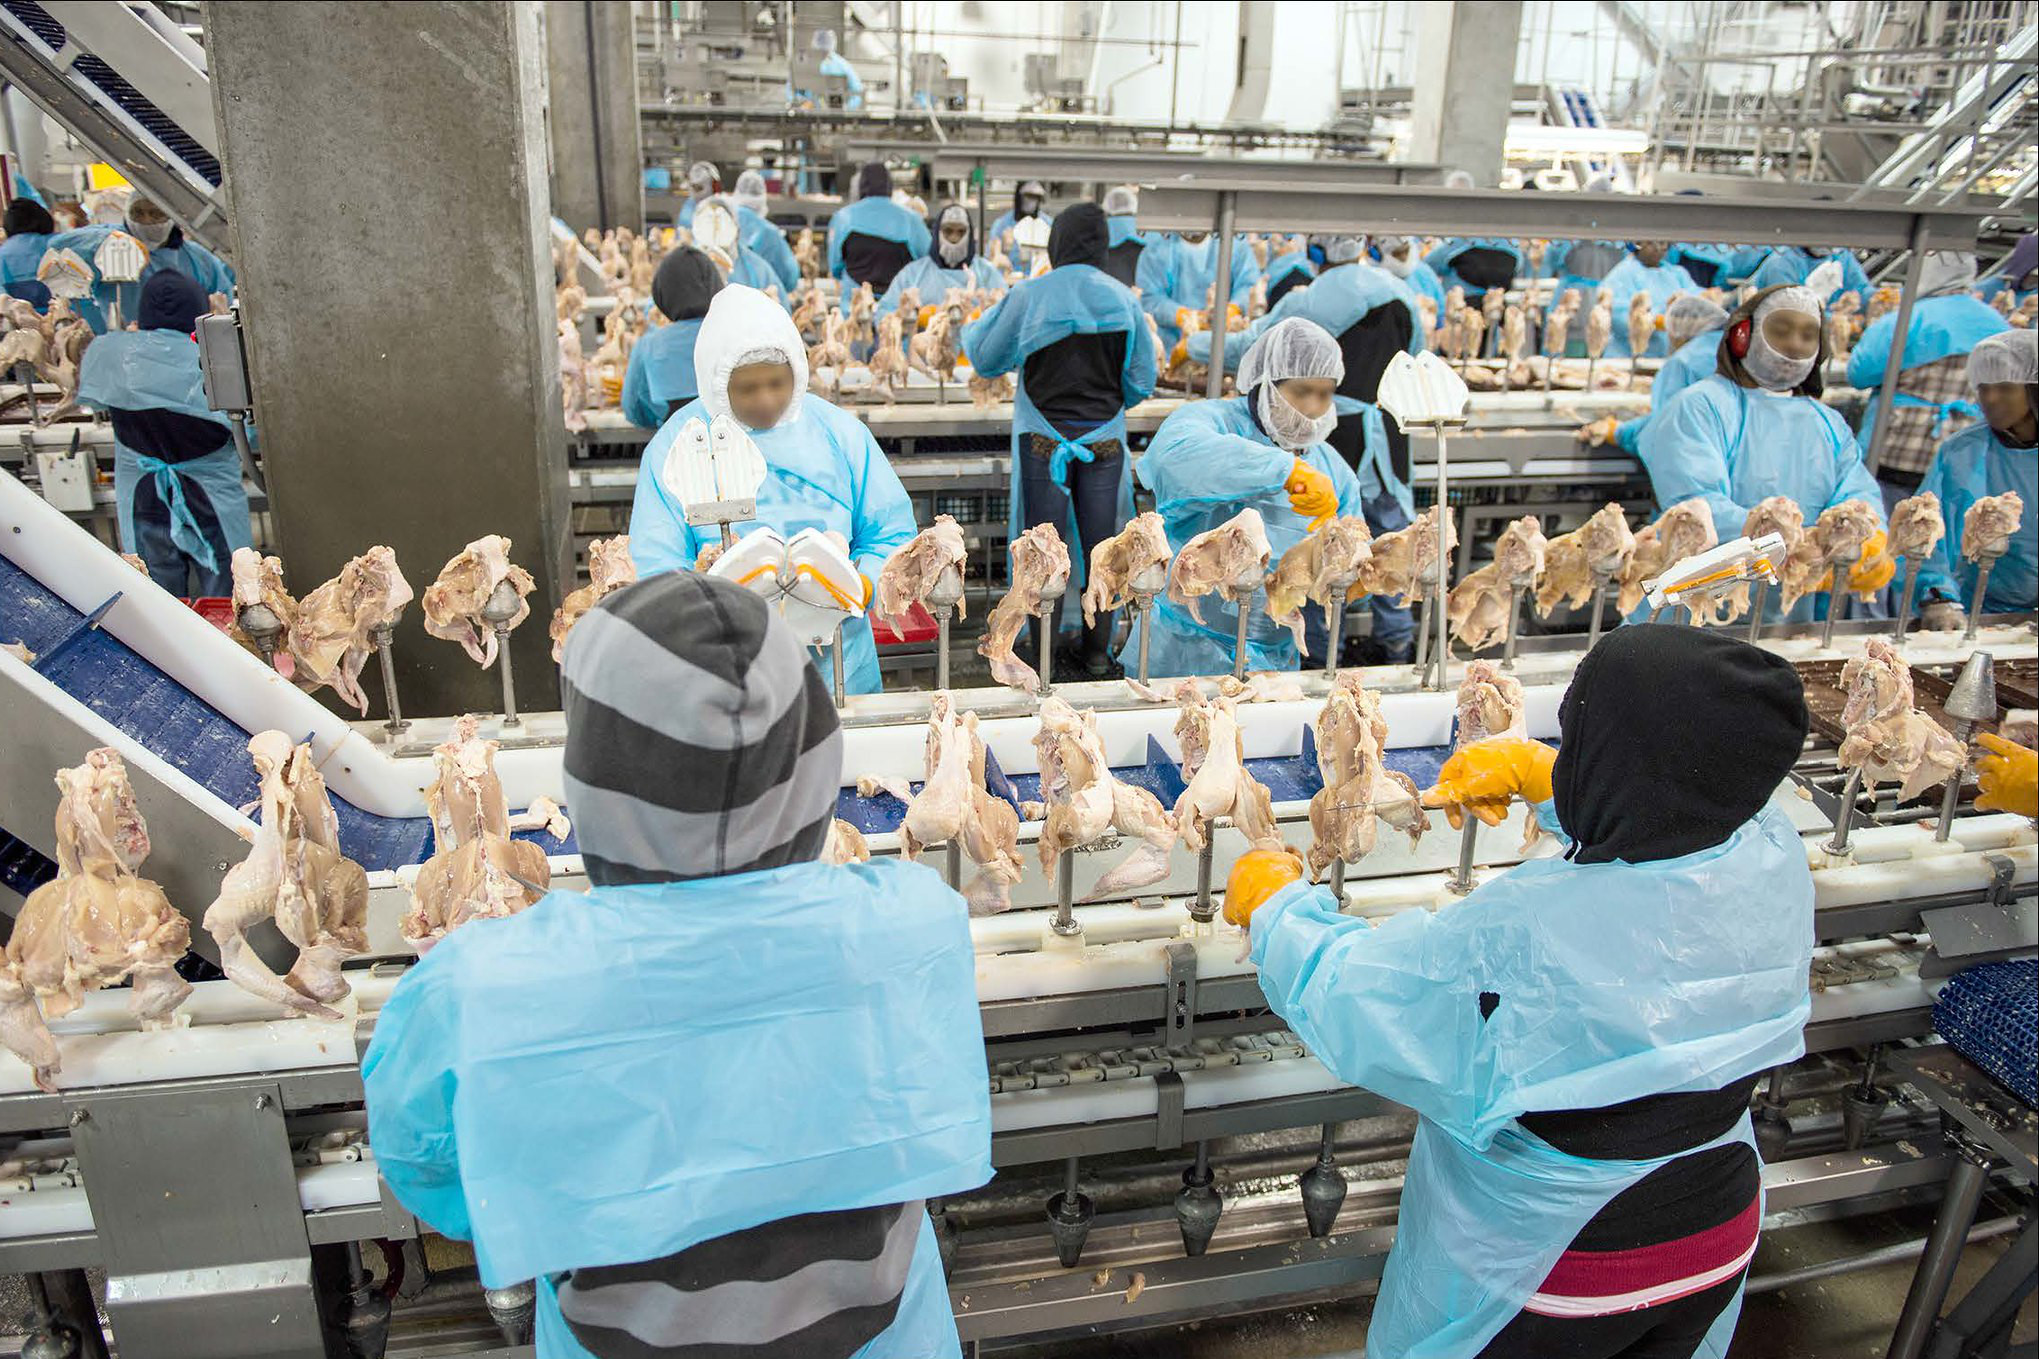 Image from inside a chicken processing plant, chicken meat on conveyor lines, workers in light blue smocks and yellow gloves, visible faces are blurred.